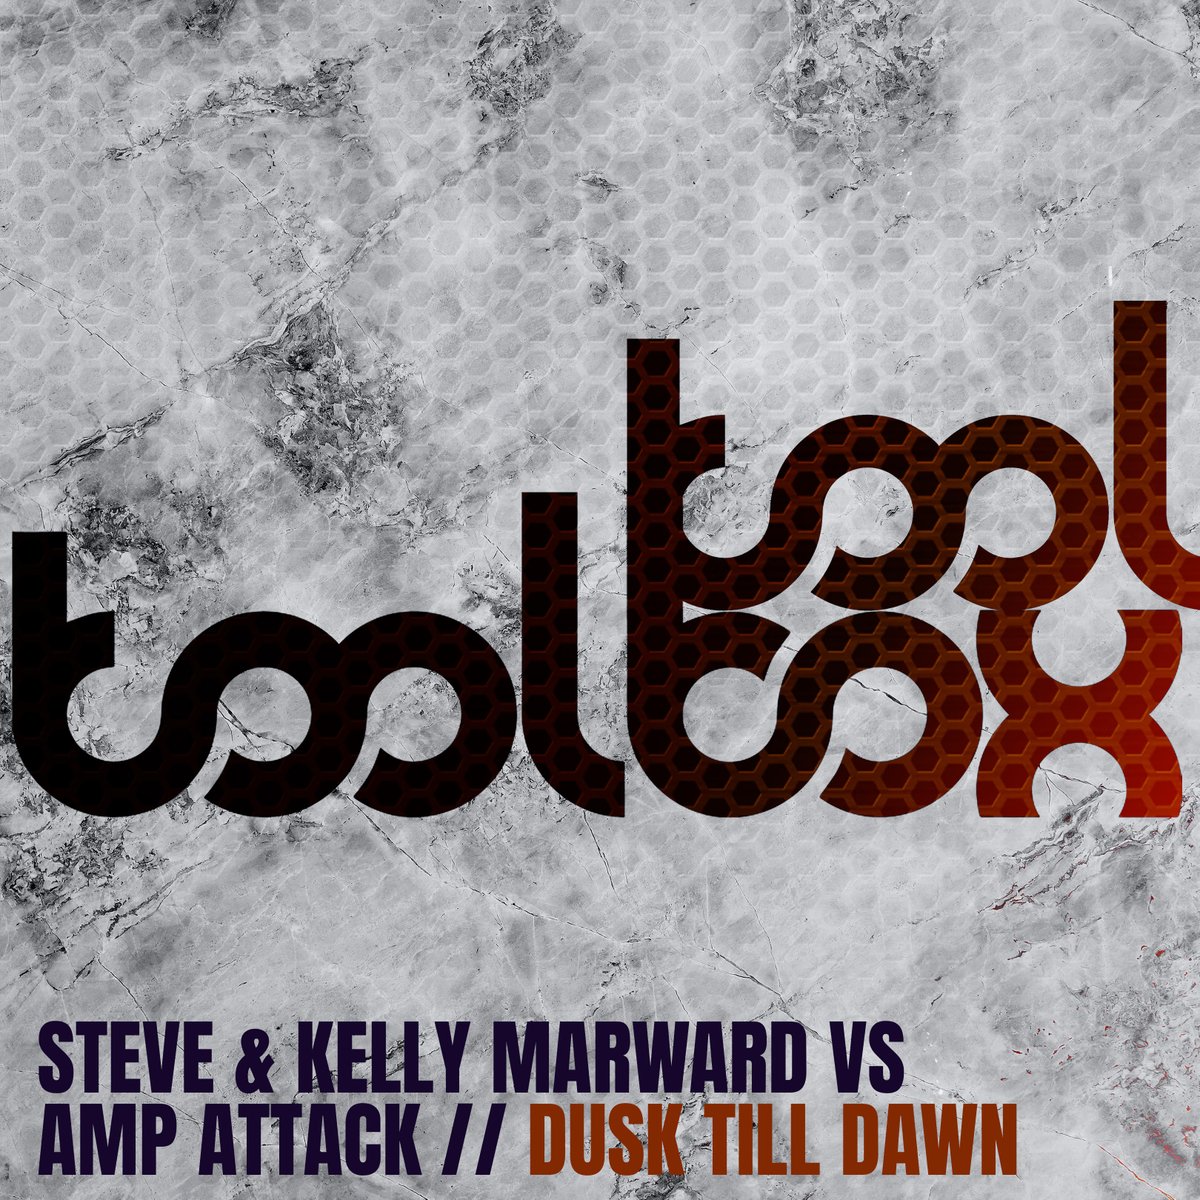 Toolbox Recordings latest release 'From Dusk Till Dawn' from Steve & Kelly Marward and Amp Attack is out now.

Check it out and the labels other releases here:
bit.ly/fromdusktillda…

#hardhouse #harddance #toolboxdigital #newrelease #newmusic #toolboxrecordings